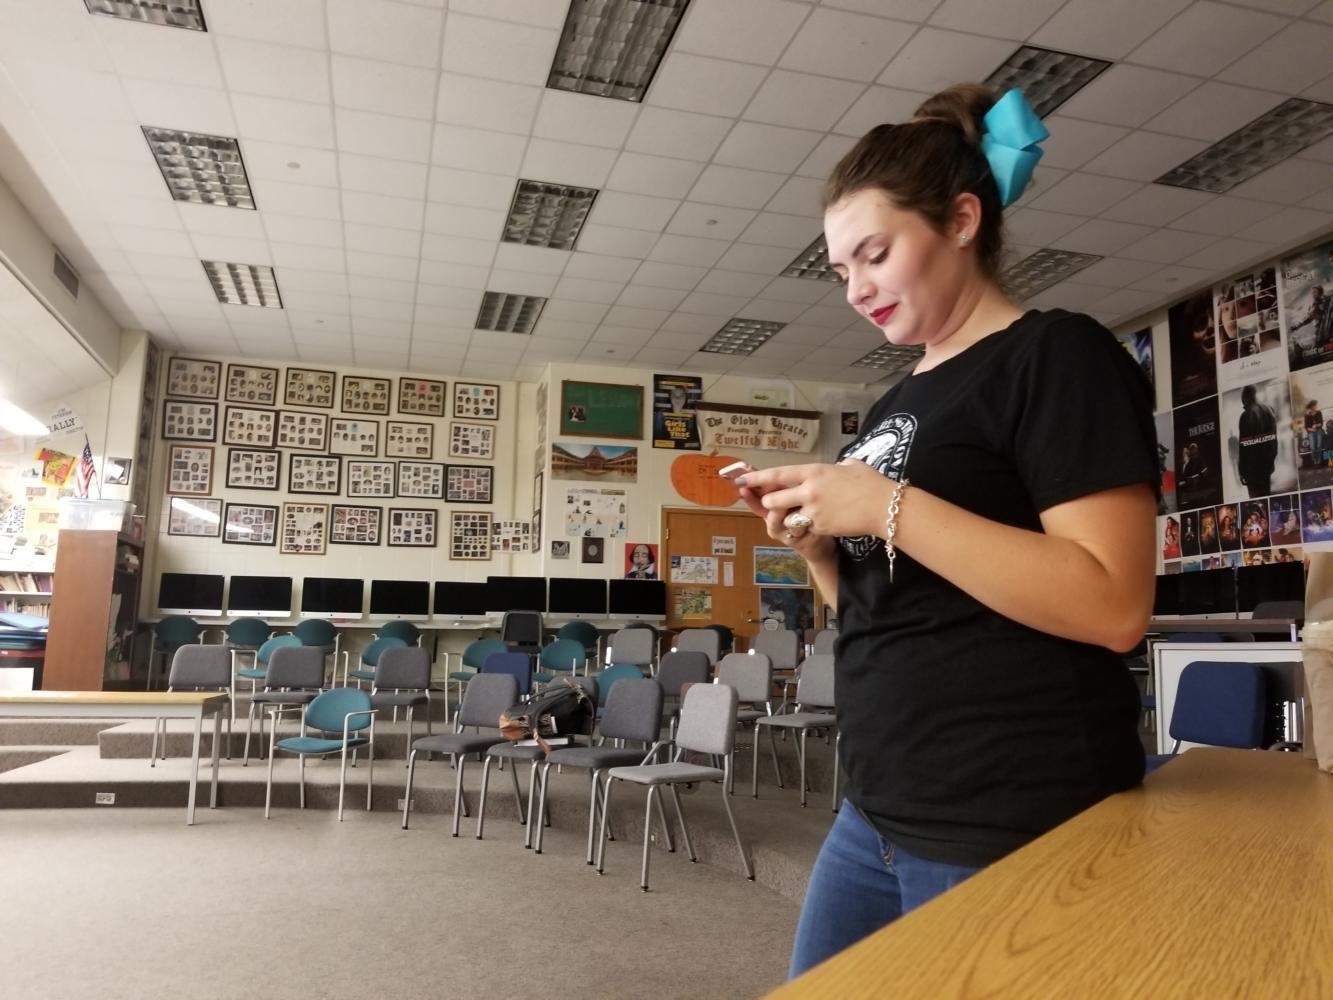 Taylor Emrick, Baking a Difference club president and senior, texts the new vice president, Morgan Goodrich, to plan their next meeting. She chose Goodrich to be the vice president last year. “I’m really excited to see what the club can do this year,” Emrick said.